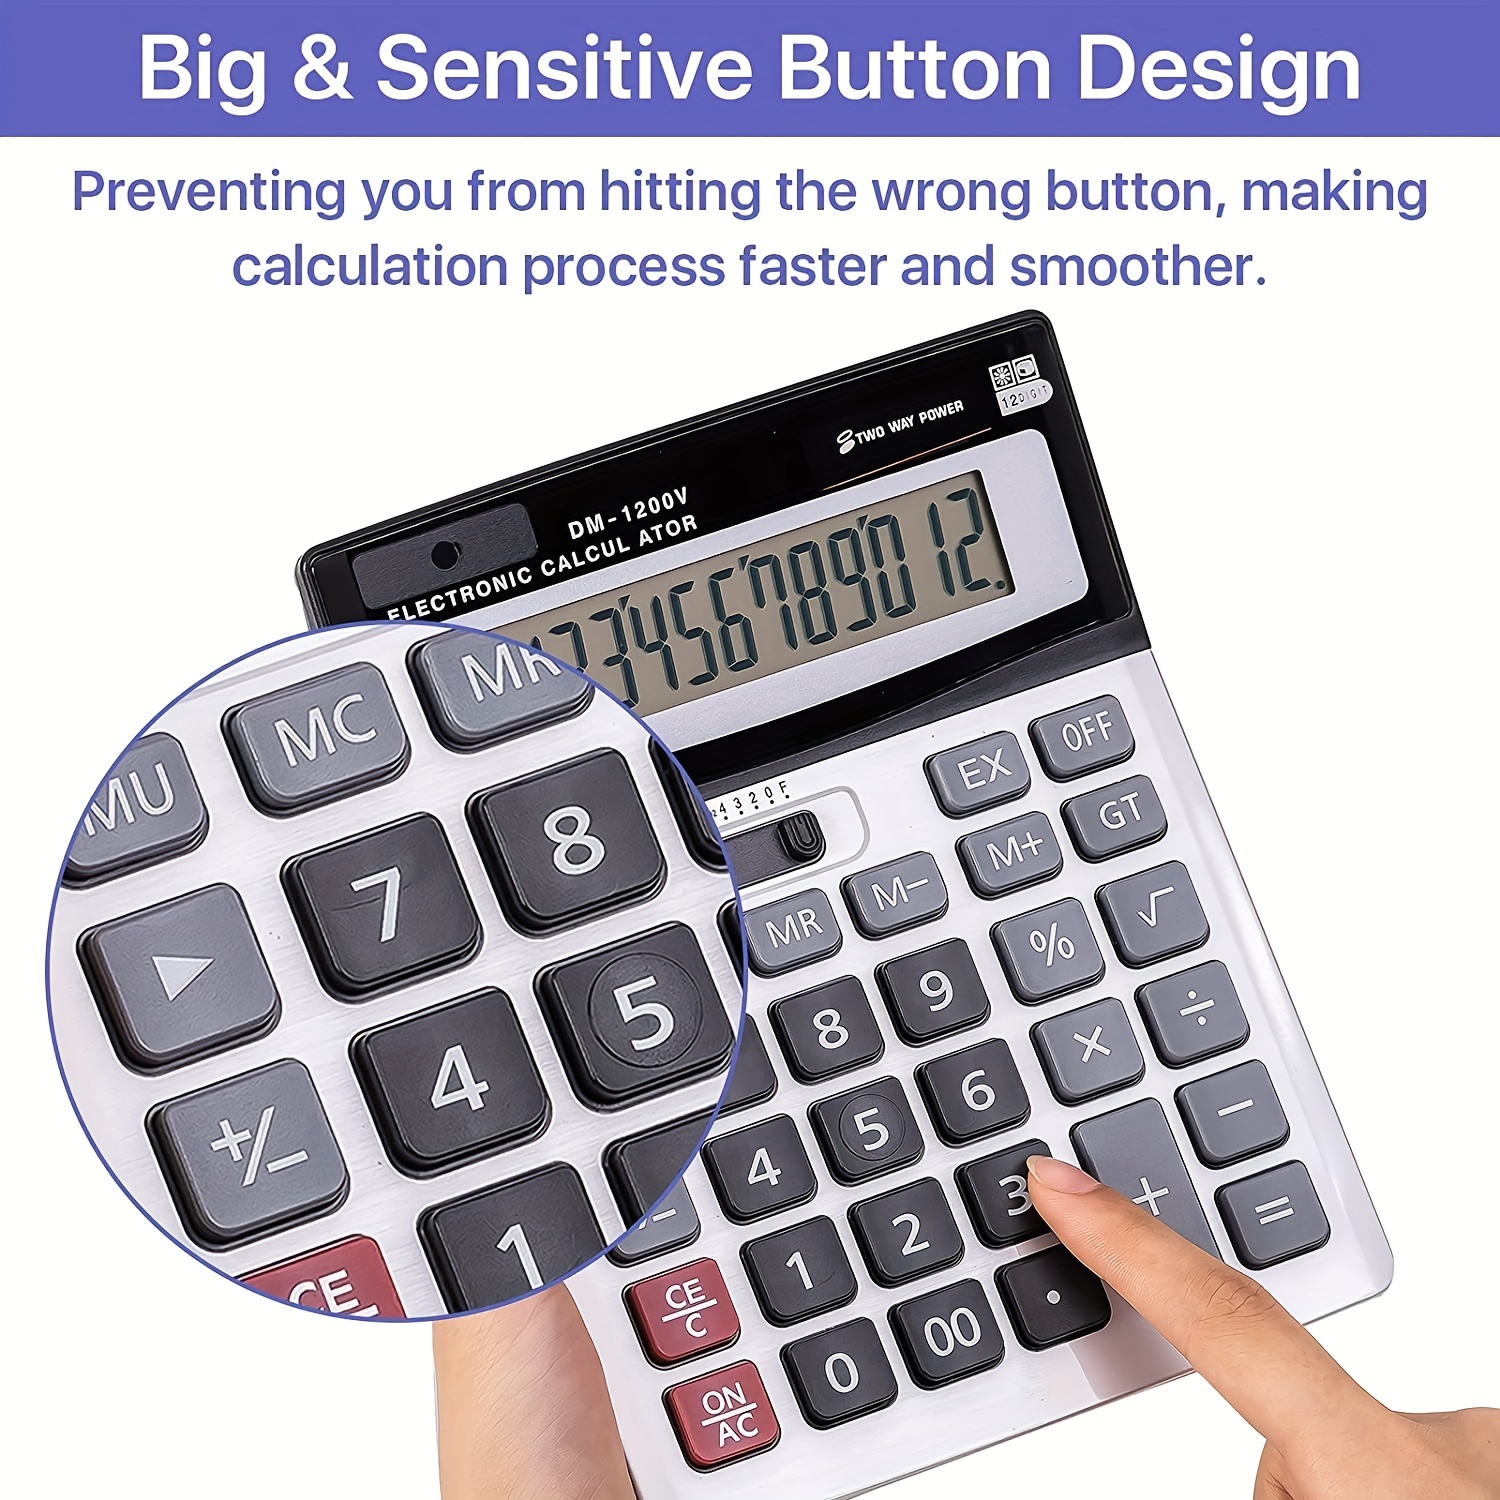 12 Digit Desktop Calculator With Large Buttons Two Way Power